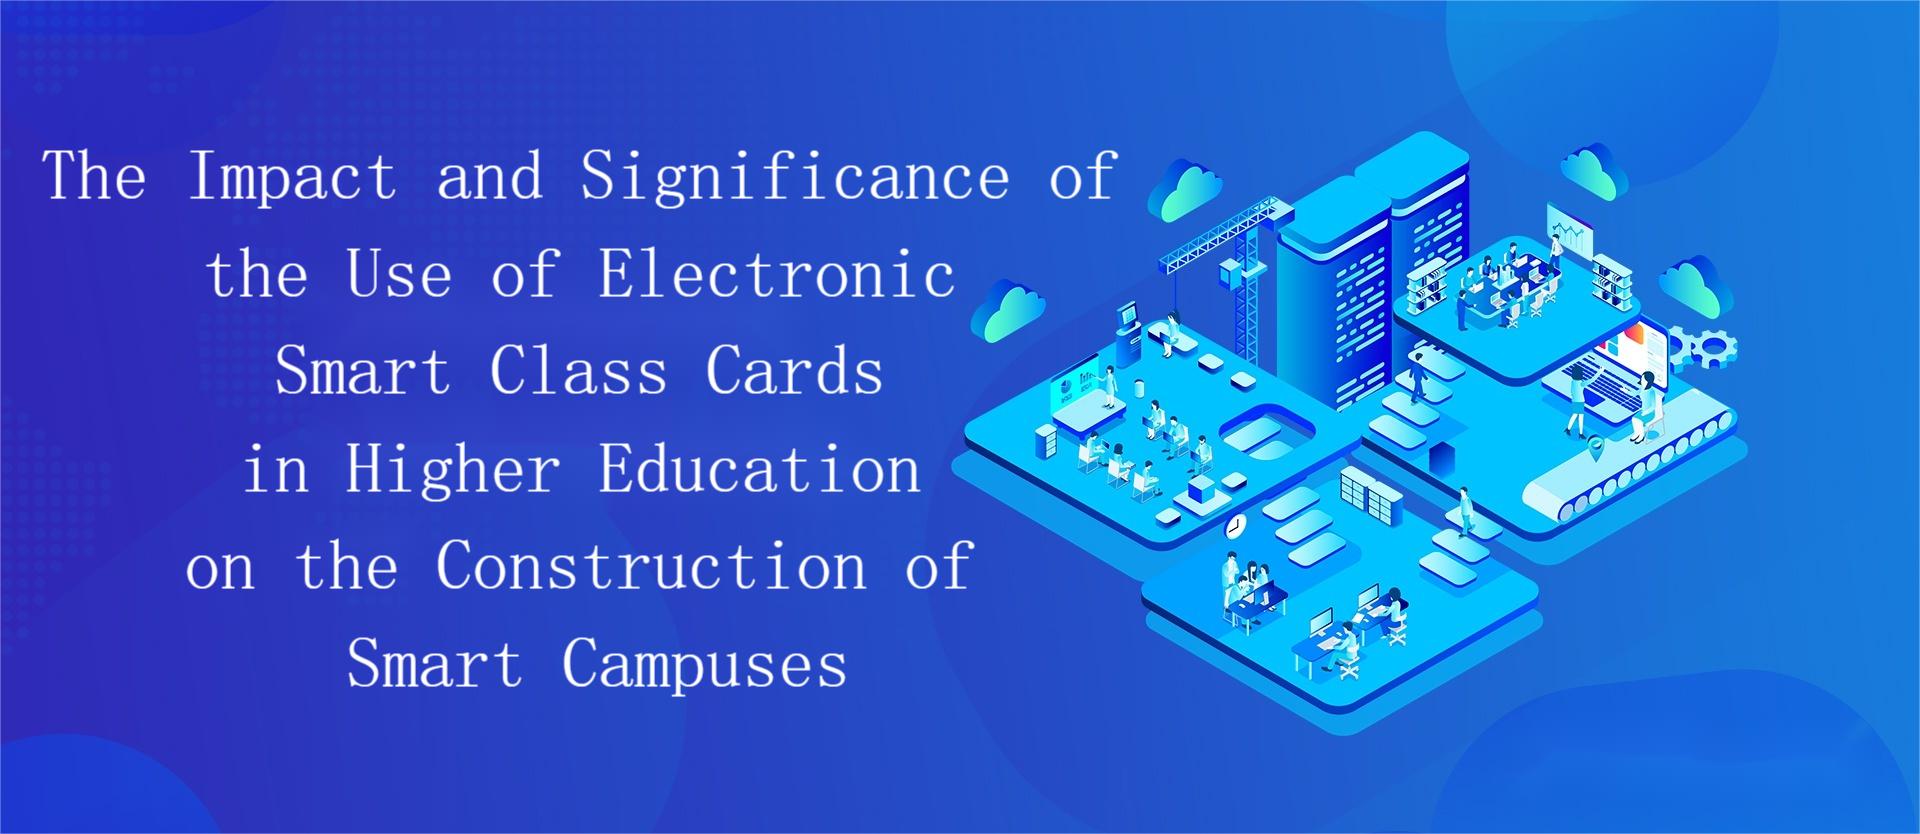 The Impact and Significance of the Use of Electronic Smart Class Cards in Higher Education on the Construction of Smart Campuses